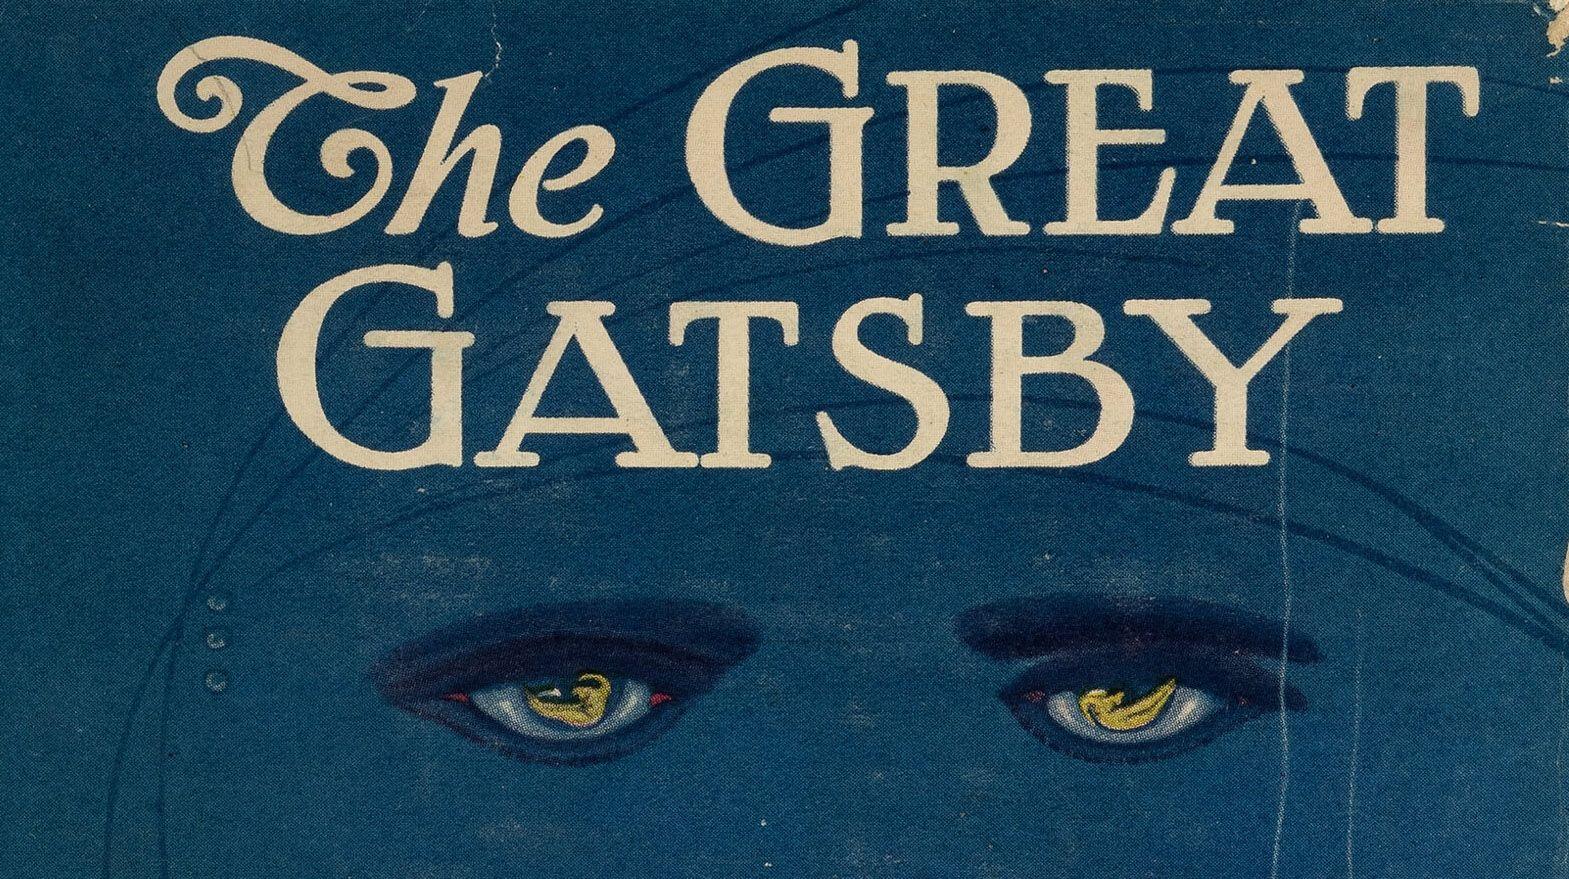 Signed 'Great Gatsby' sells for record $450,000 